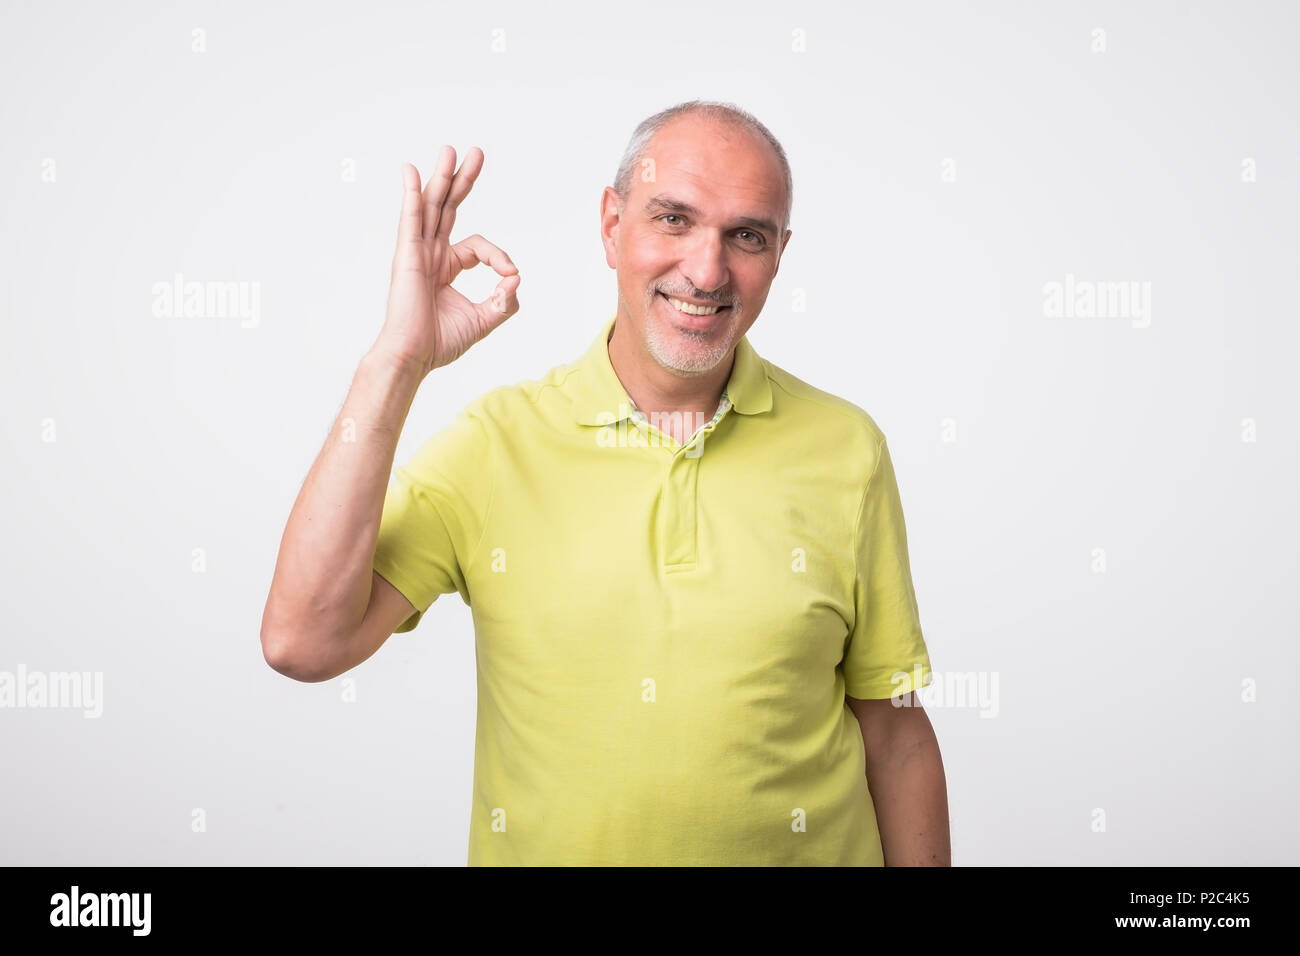 A handsome man in checkered shirt isolated on gray background showing ok sign Stock Photo